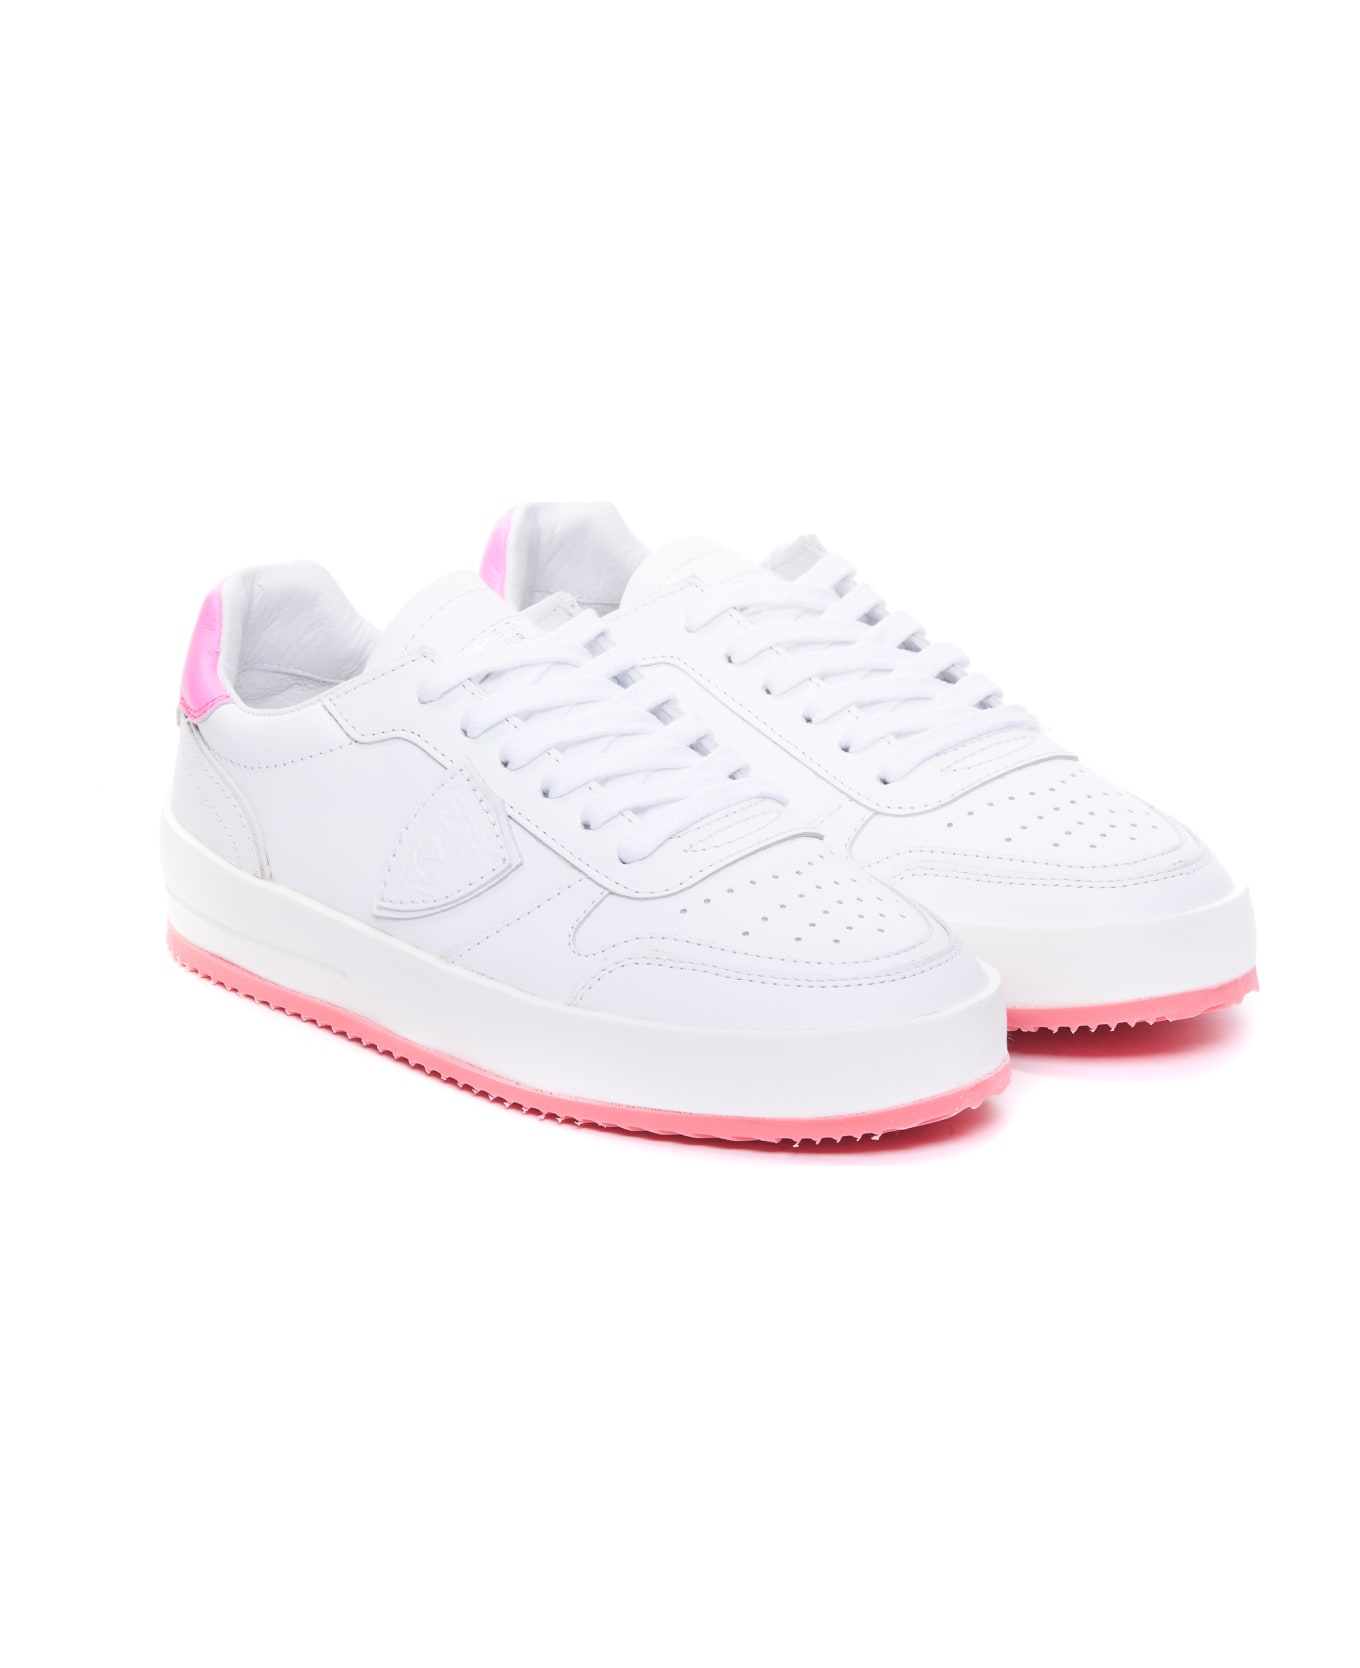 Philippe Model Nice Low Sneakers - Veau Neon Blanc Fucsia スニーカー